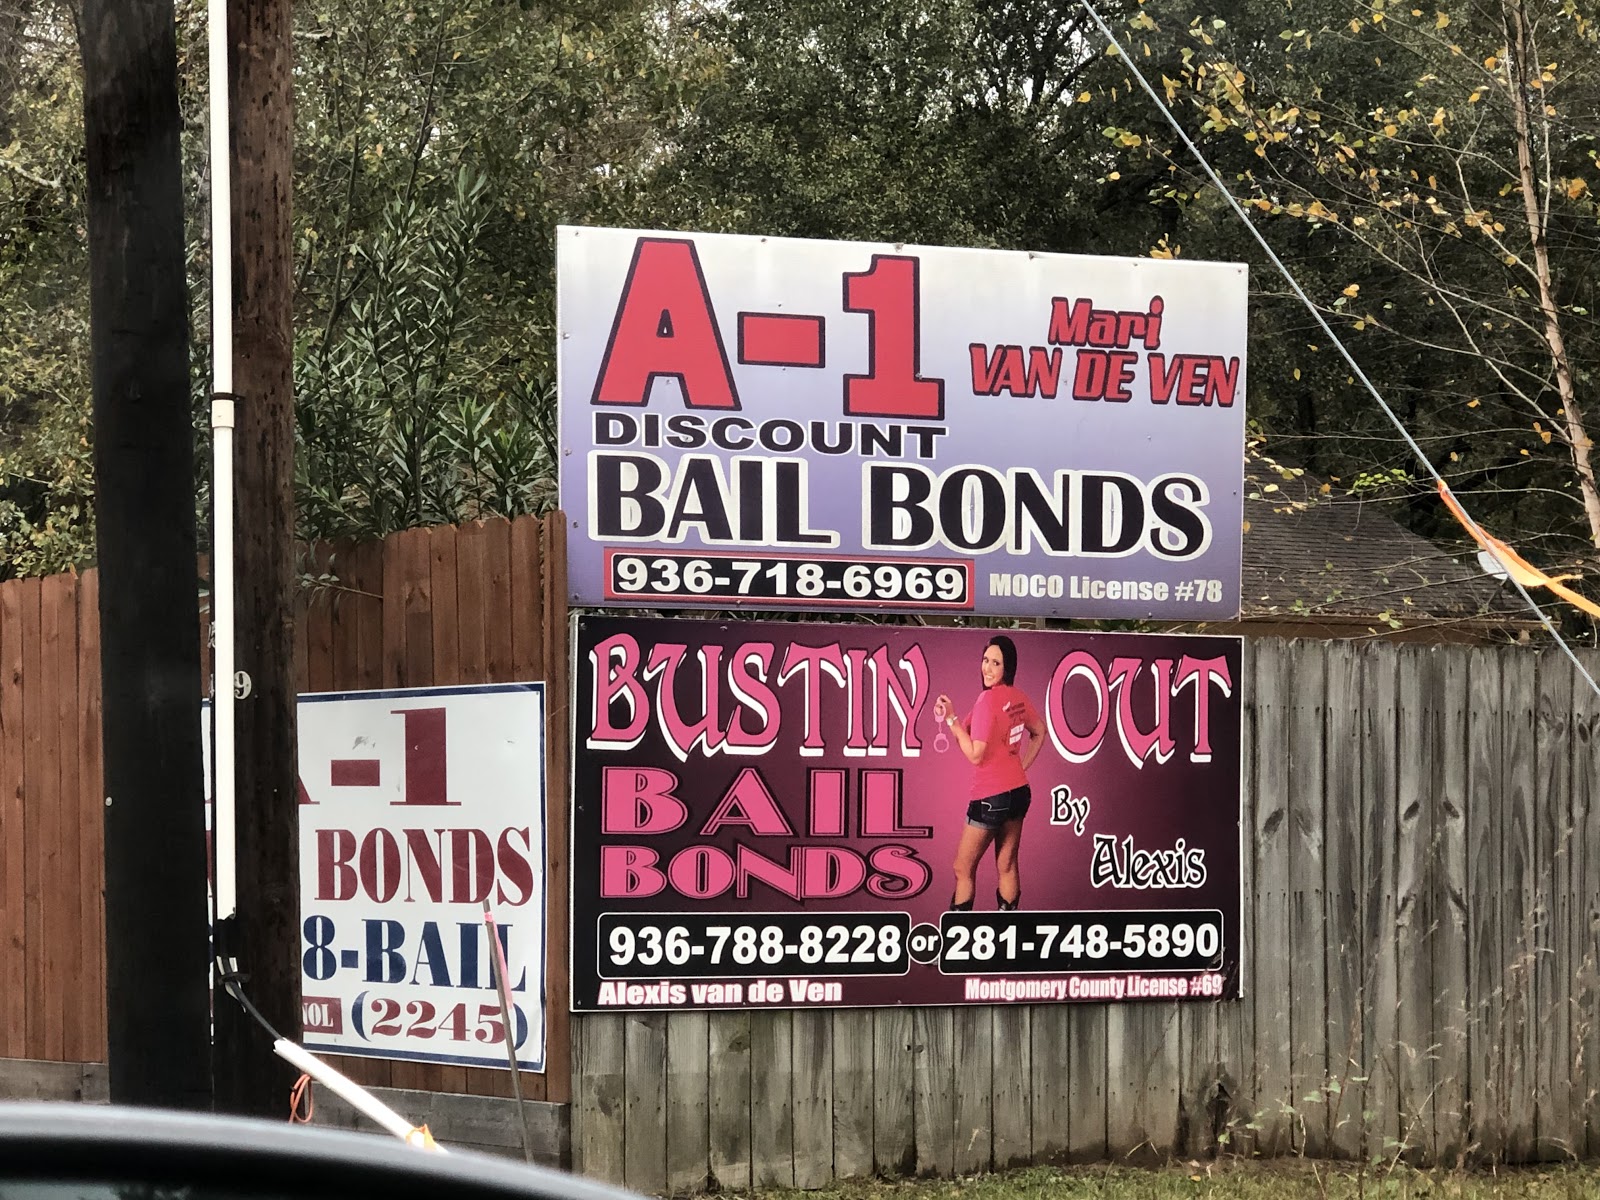 Two pink and red road signs read "A-1 Discount Bail Bonds" and "Bustin Out Bail Bonds"